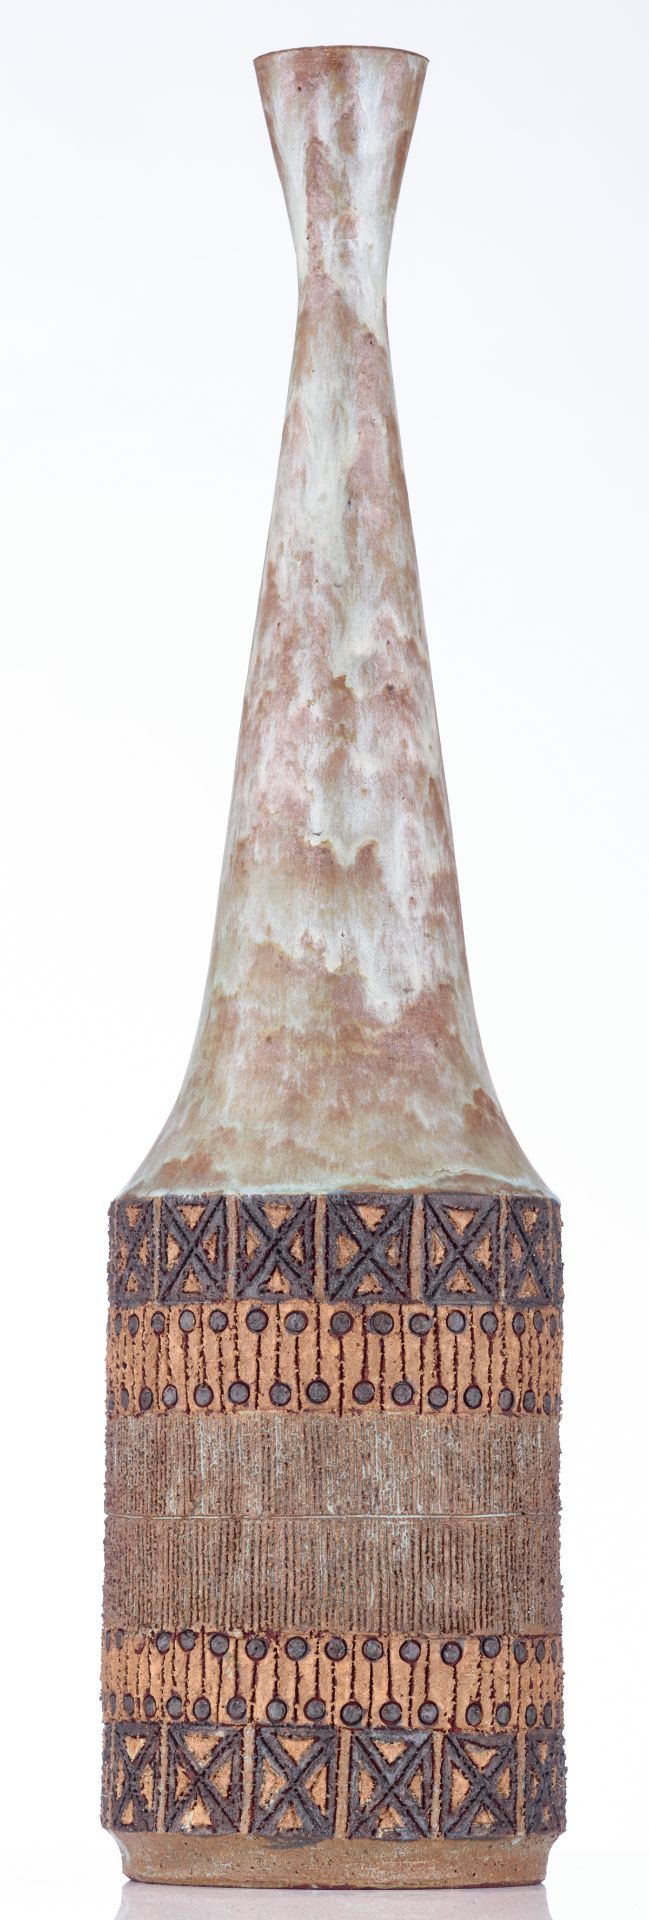 A 1960s type earthenware vase in the Bruges Amphora manner, with a glazed and structured surface, - Image 3 of 5